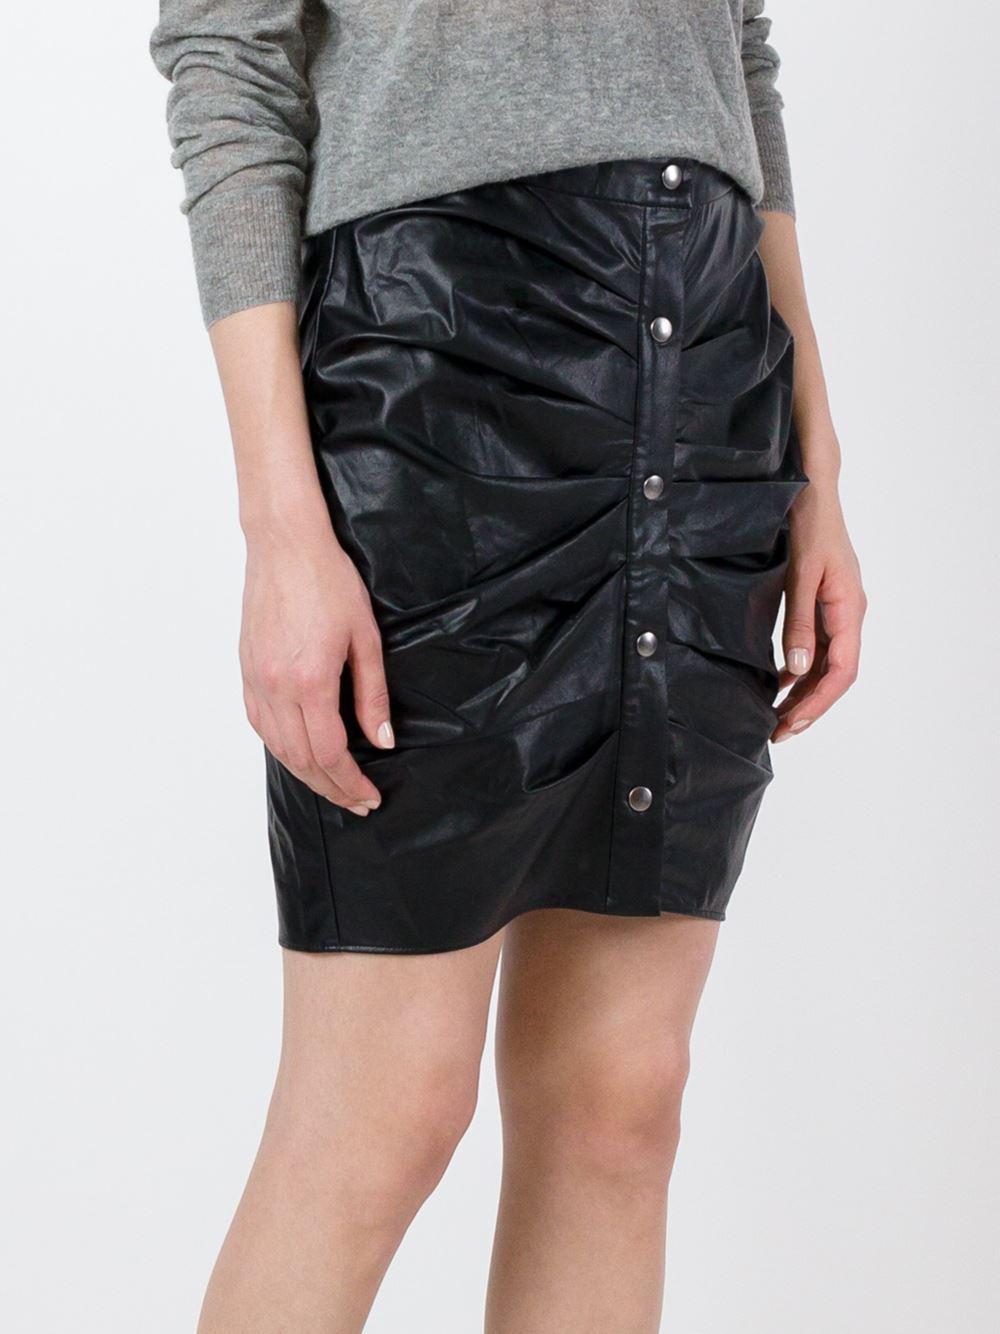 Étoile Isabel Marant 'july' Faux Leather Skirt in Black - Lyst